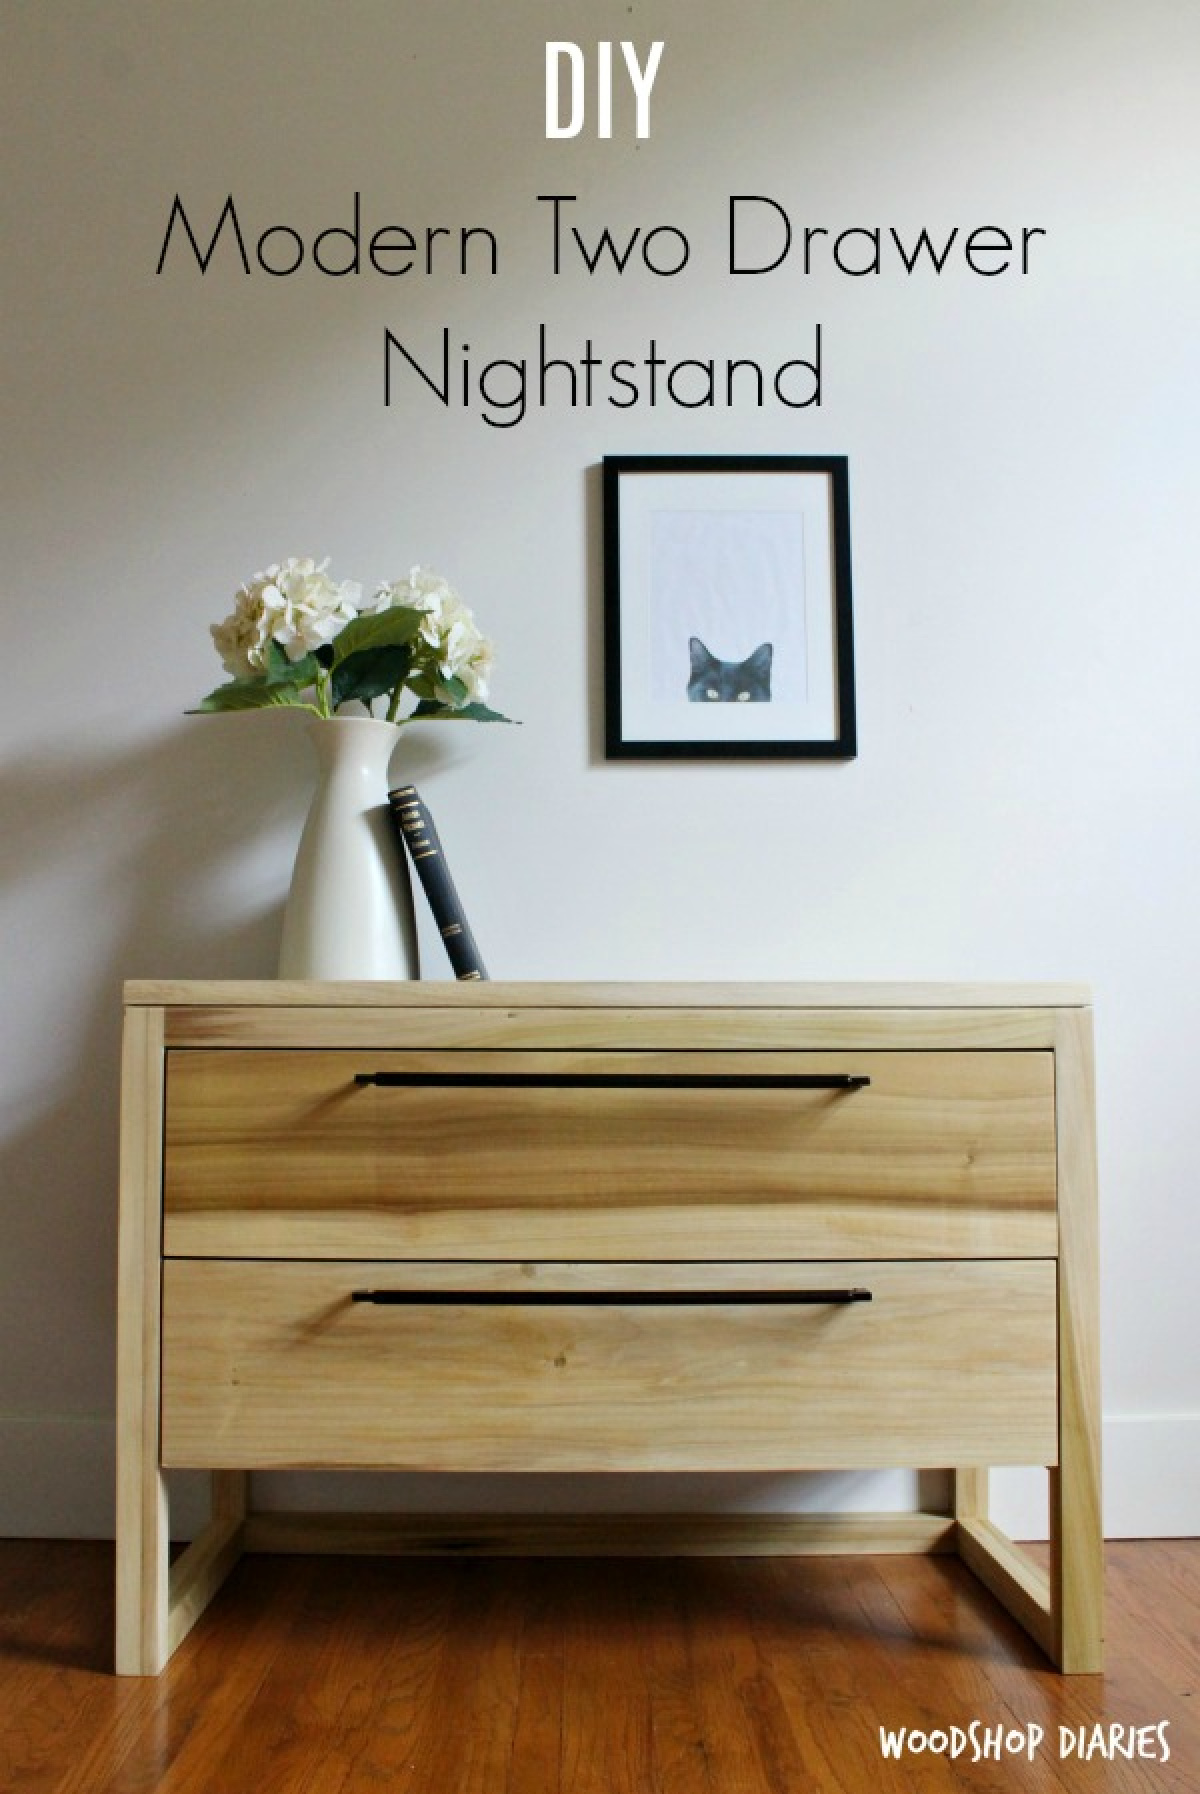 Modern poplar nightstand with two drawers against white wall with text "DIY modern two drawer nightstand"